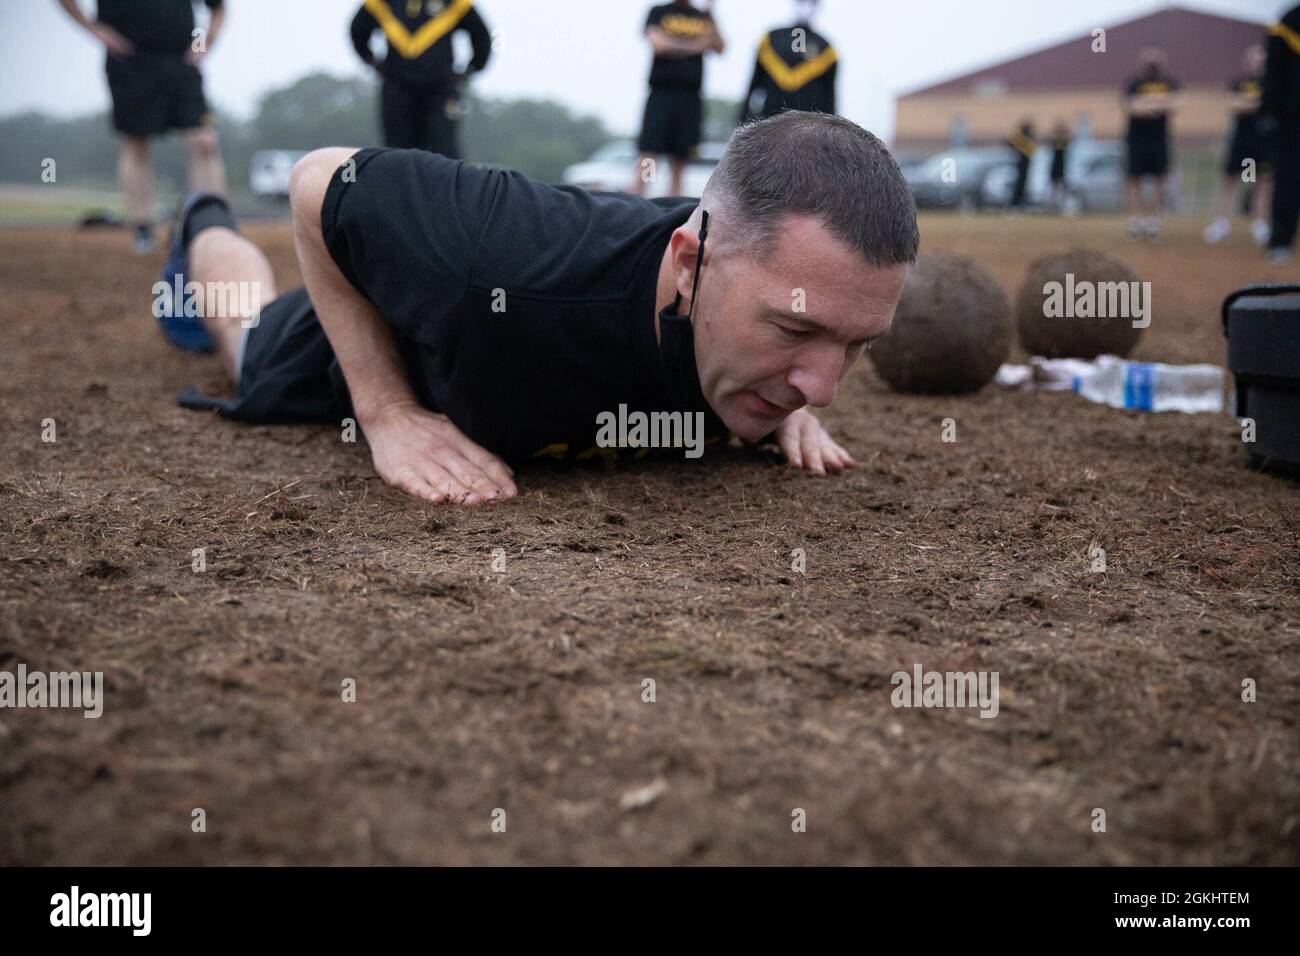 A U.S. Army Soldier with the Army Reserve Sustainment Command, attempts a hand-release push-up during a diagnostic Army Combat Fitness Test (ACFT) on Camp Bullis in San Antonio, Texas, April 27, 2021.  The ACFT is part of the Contracting Operational Readiness Exercise, which validates Soldiers through different events such as weapons qualification, Land Navigation, and other ancillary training. Stock Photo